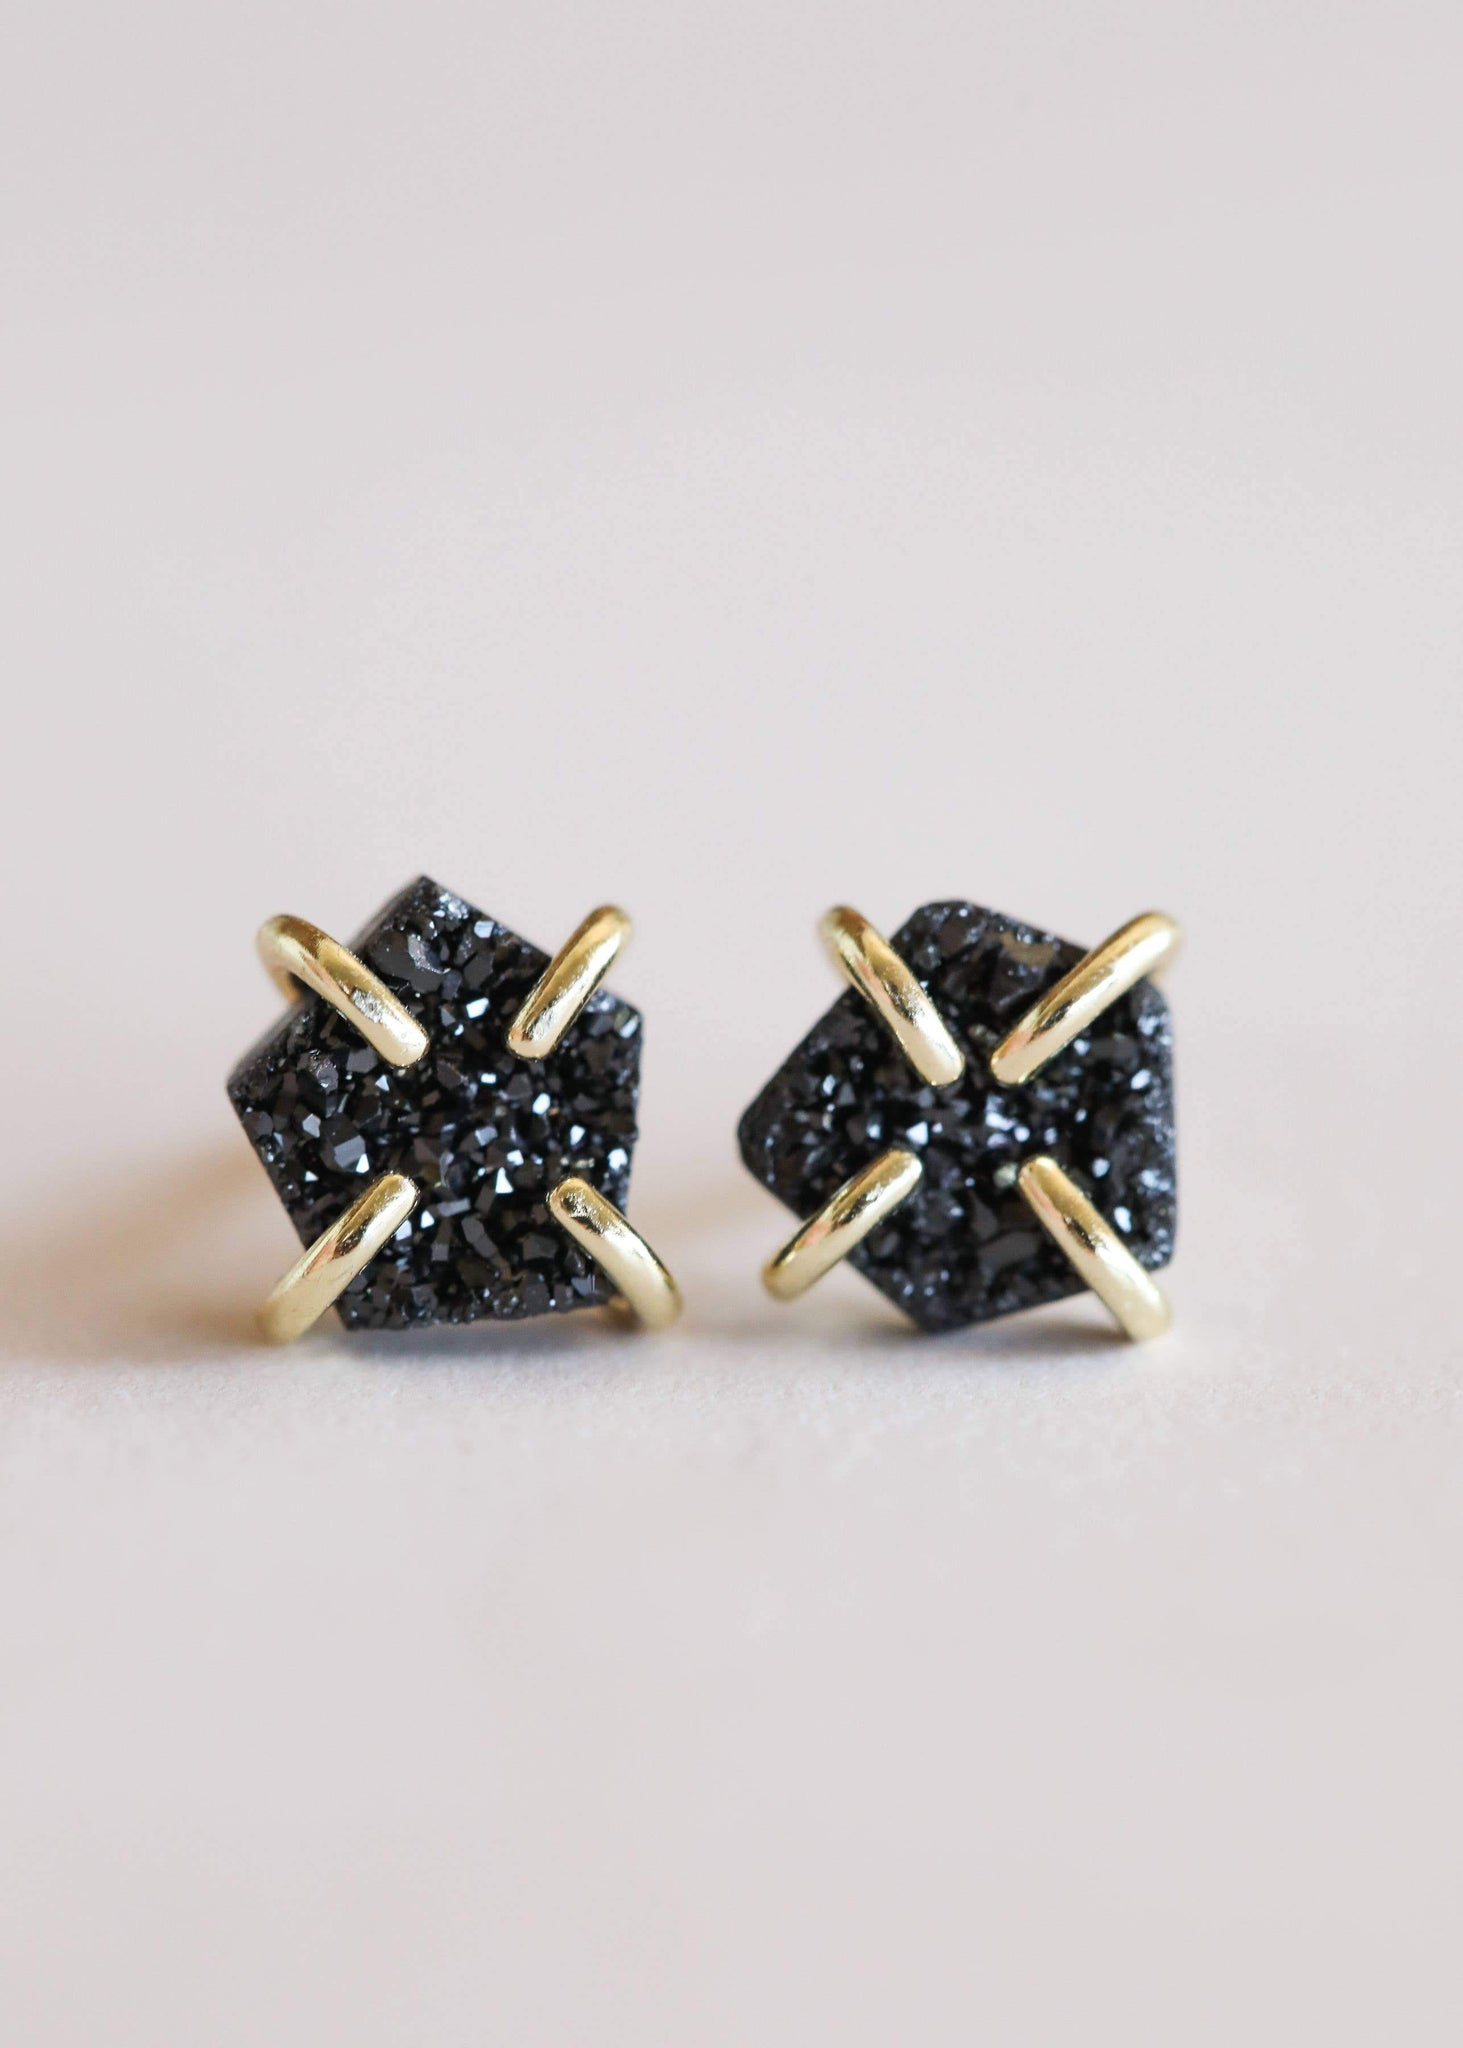 Black Druzy Prong Earrings - Rise and Redemption